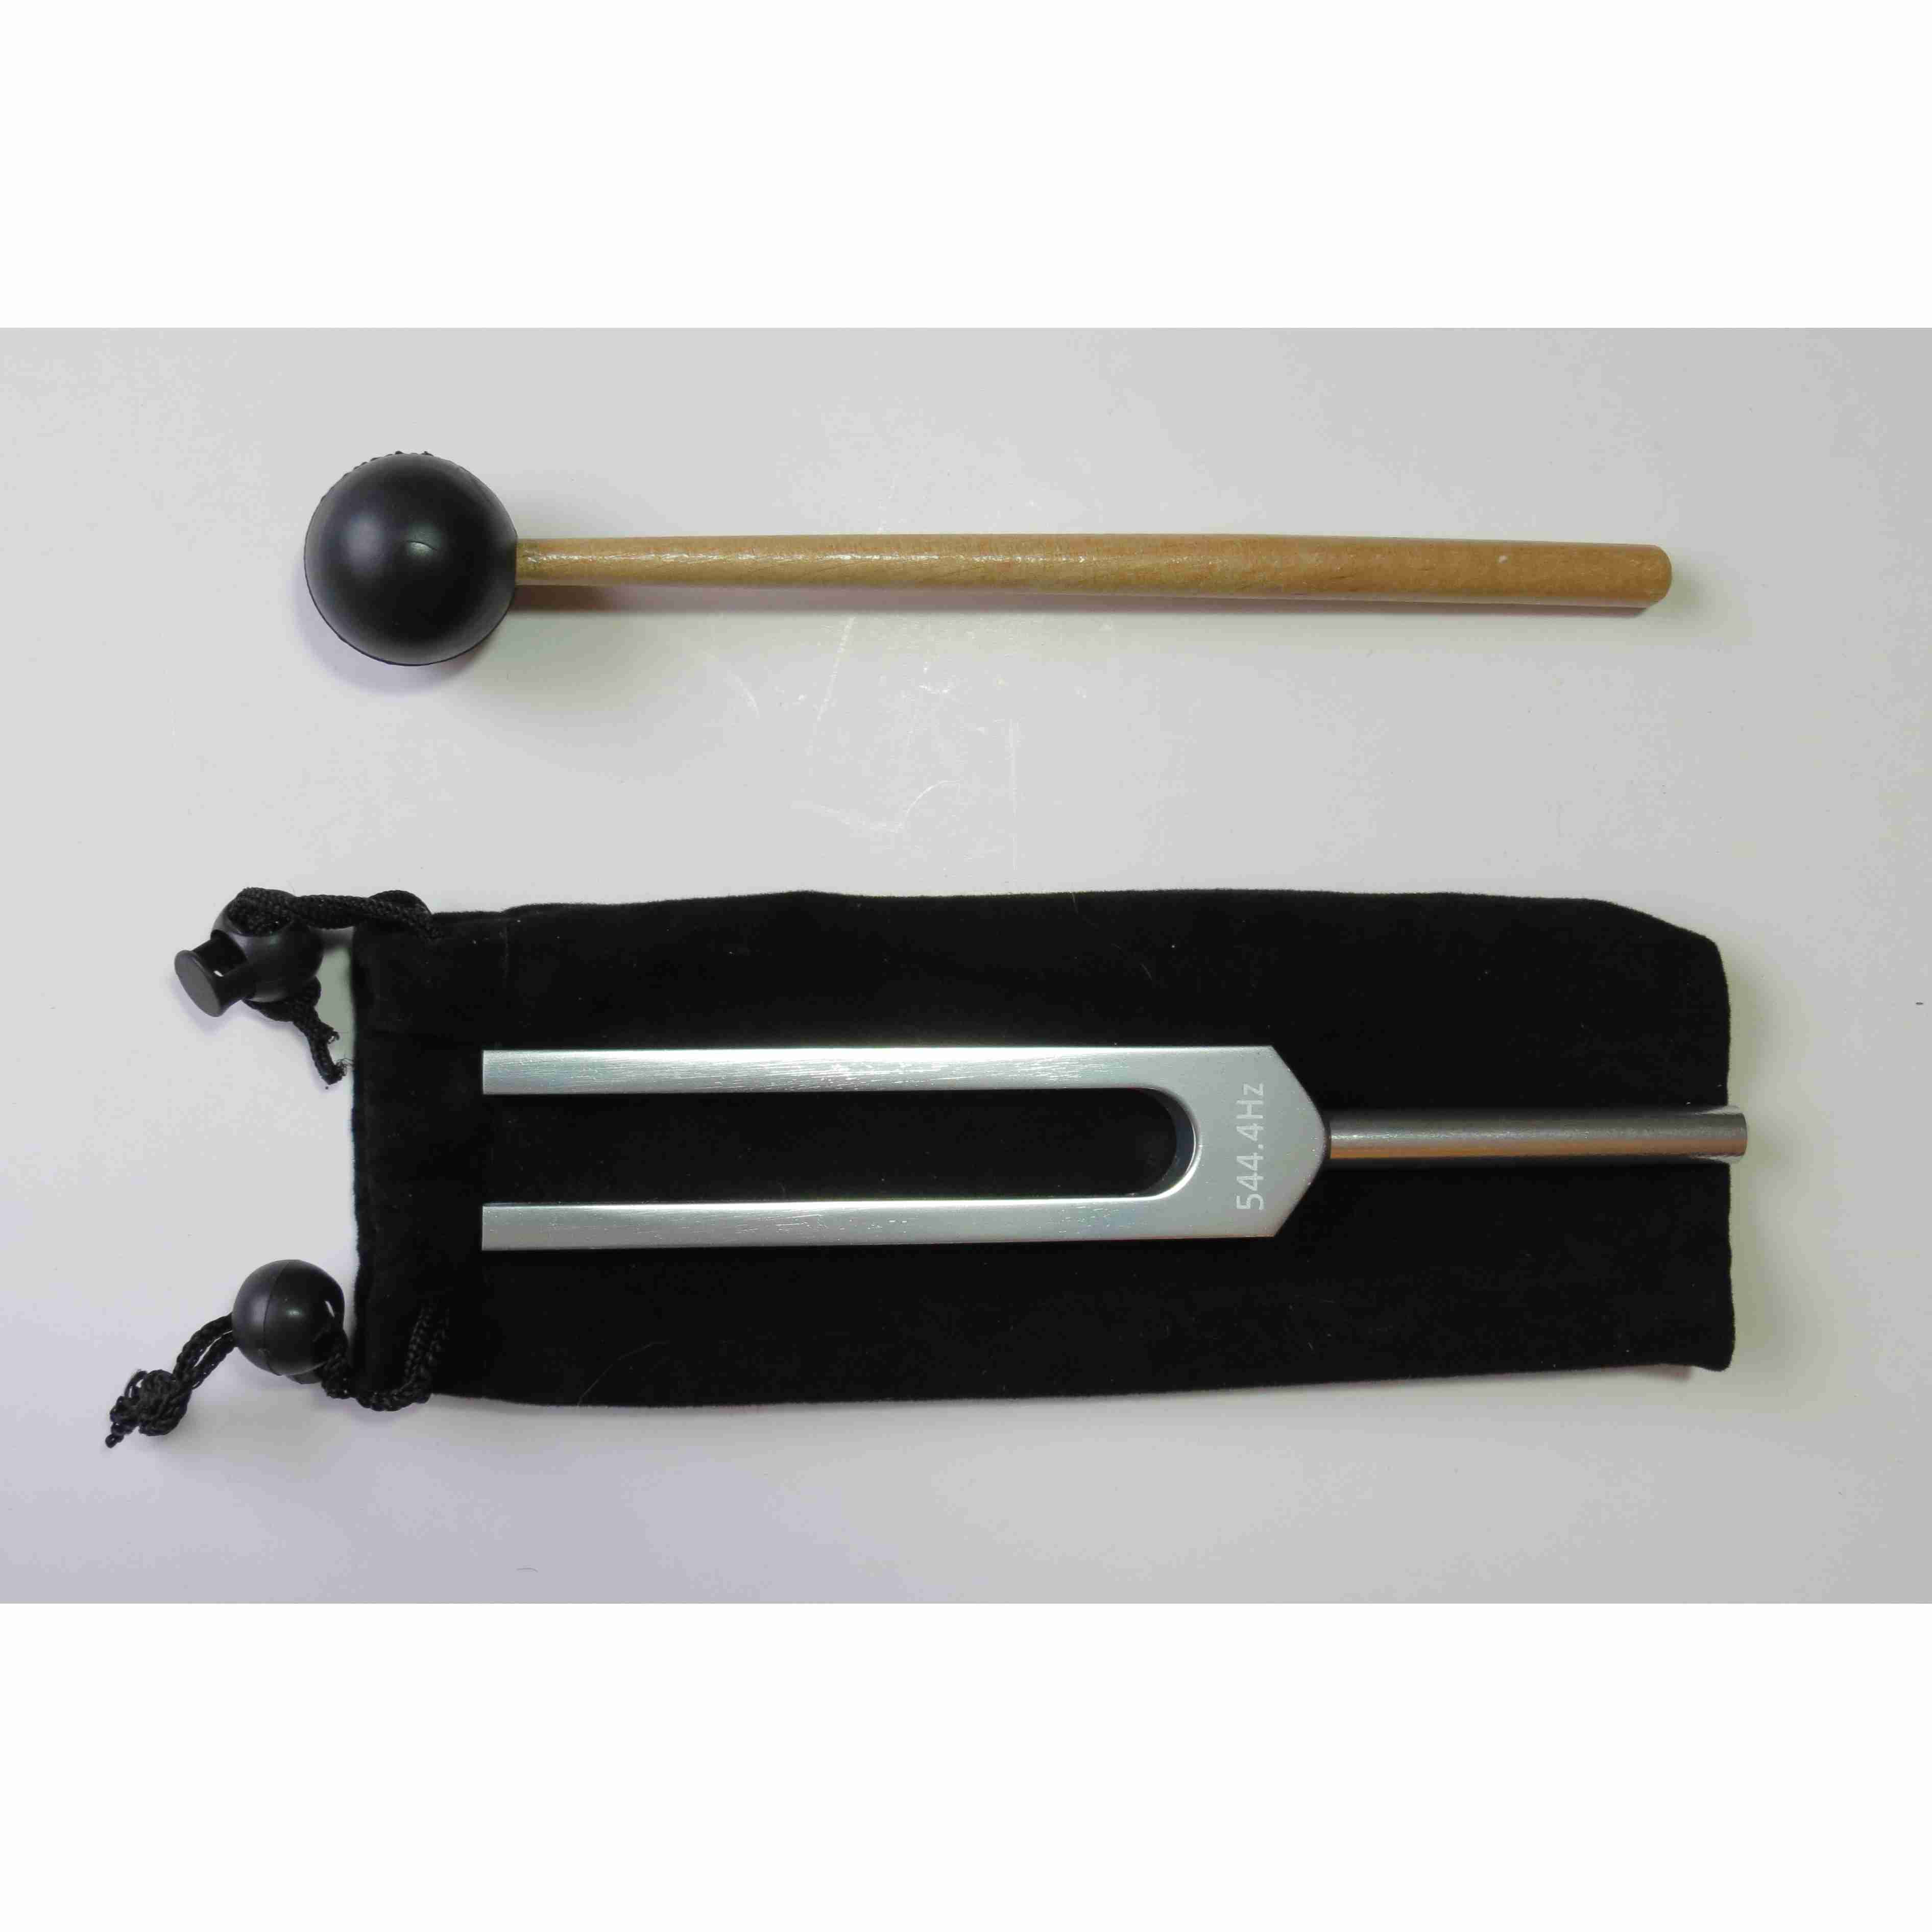 Tuning-Forks with cash back rebate